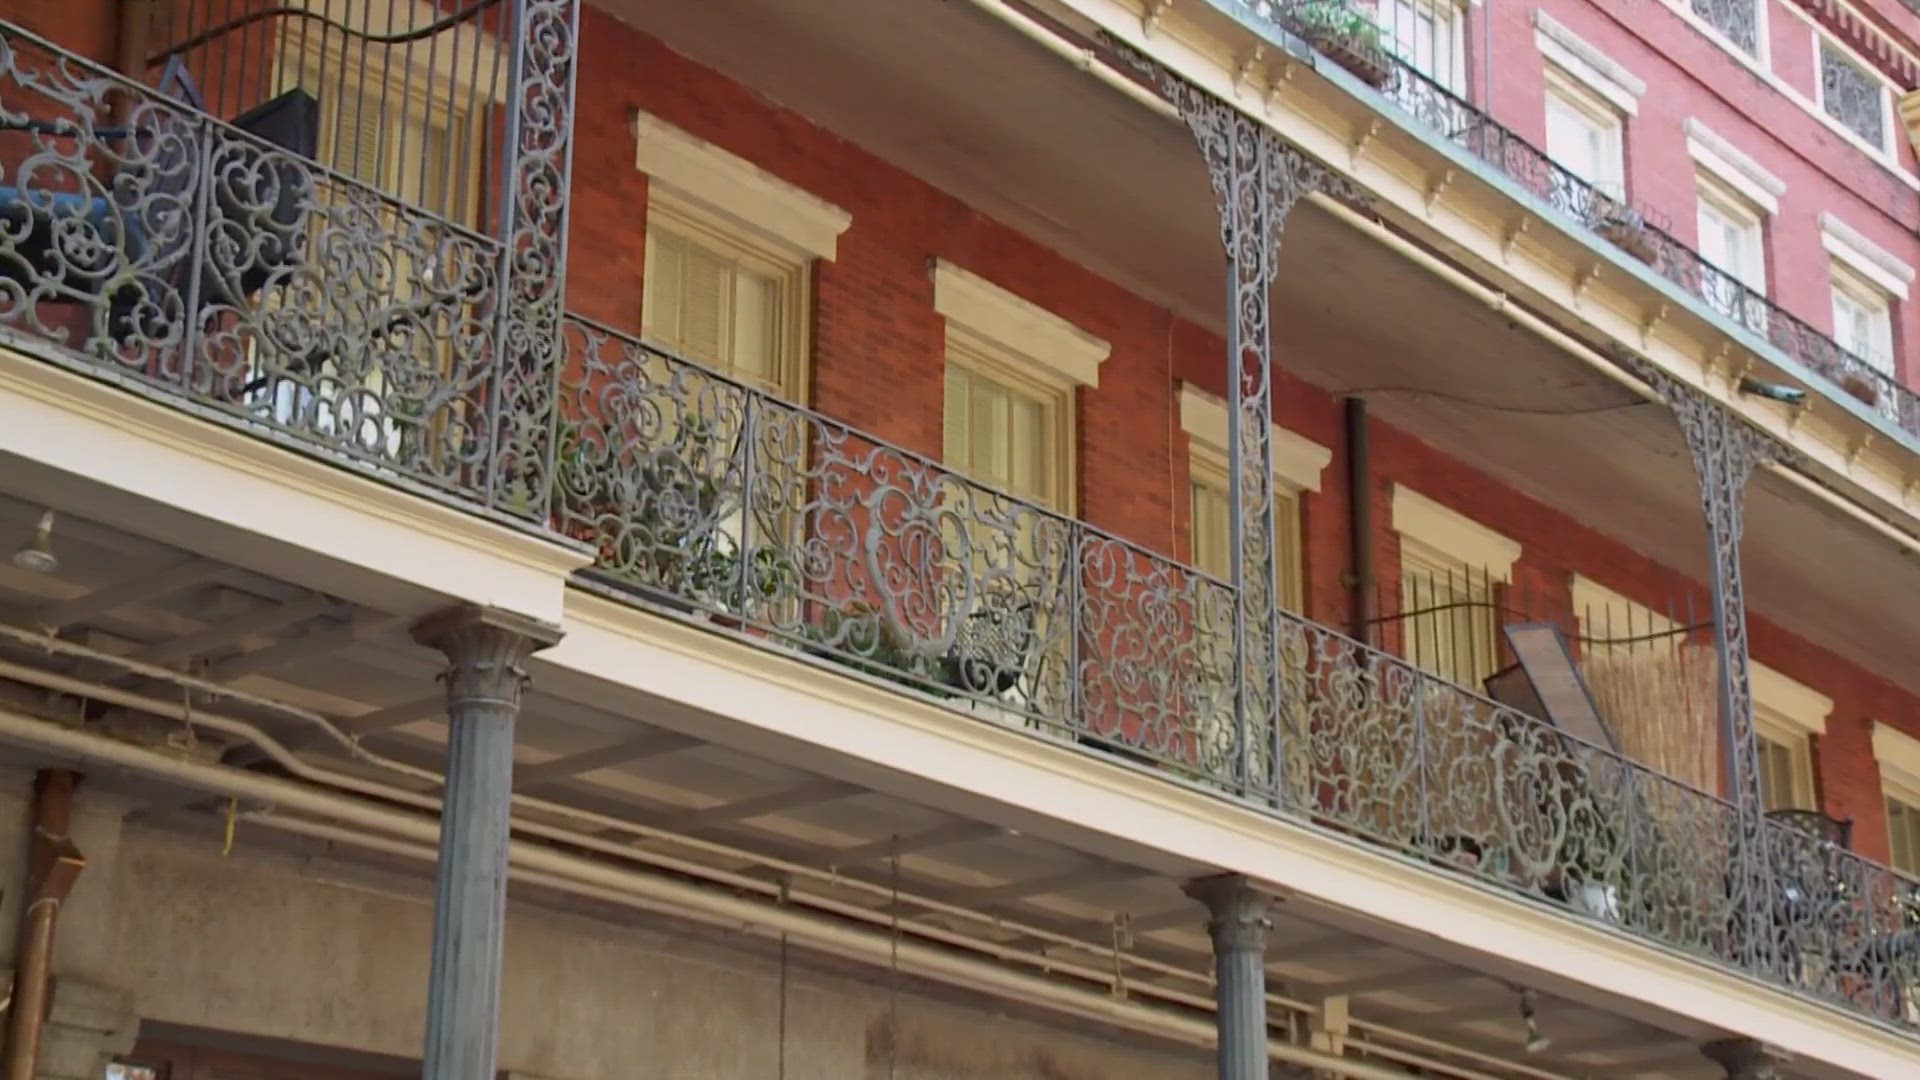 The inspector general for New Orleans said that it is hard to see a public benefit to the use of the apartment as a residence.